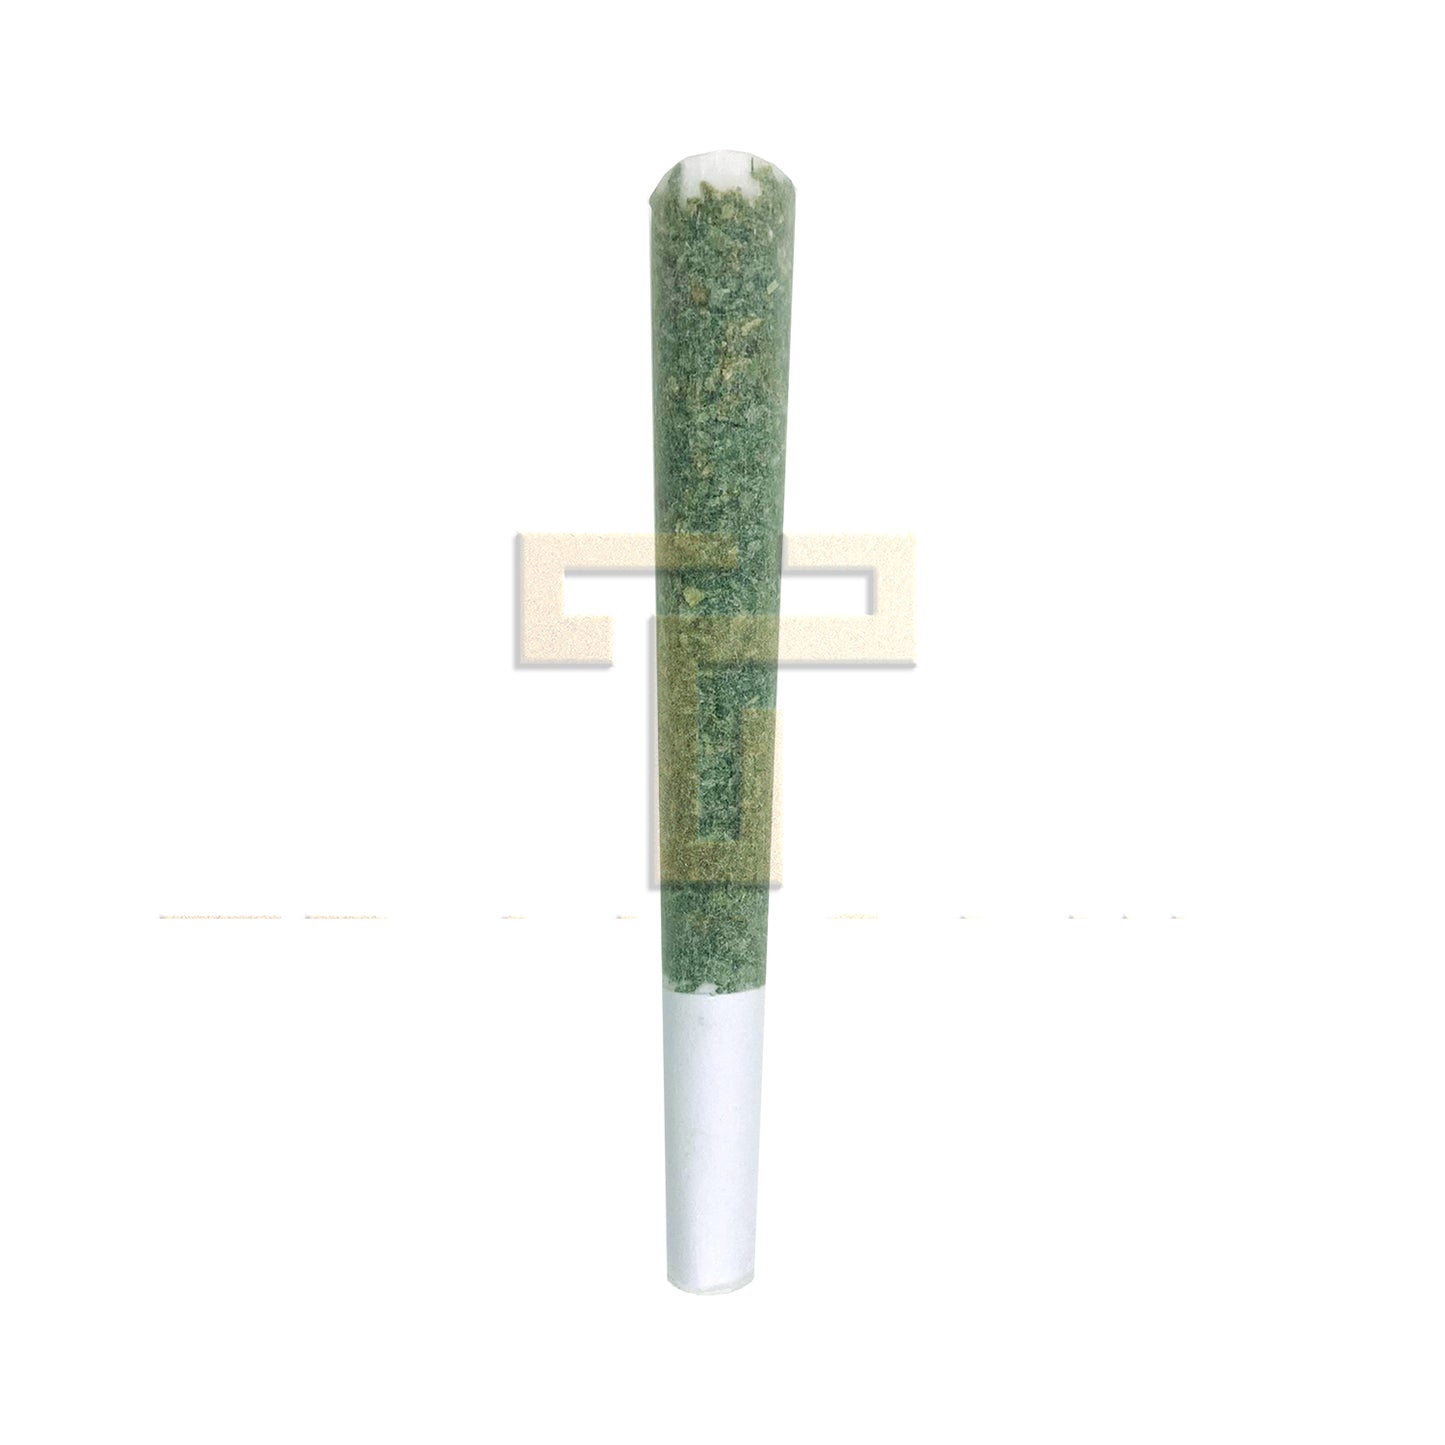 Girl Scout Cookies Indica Dominant Hybrid 18.7% THCA Living Soil 1.5g Preroll